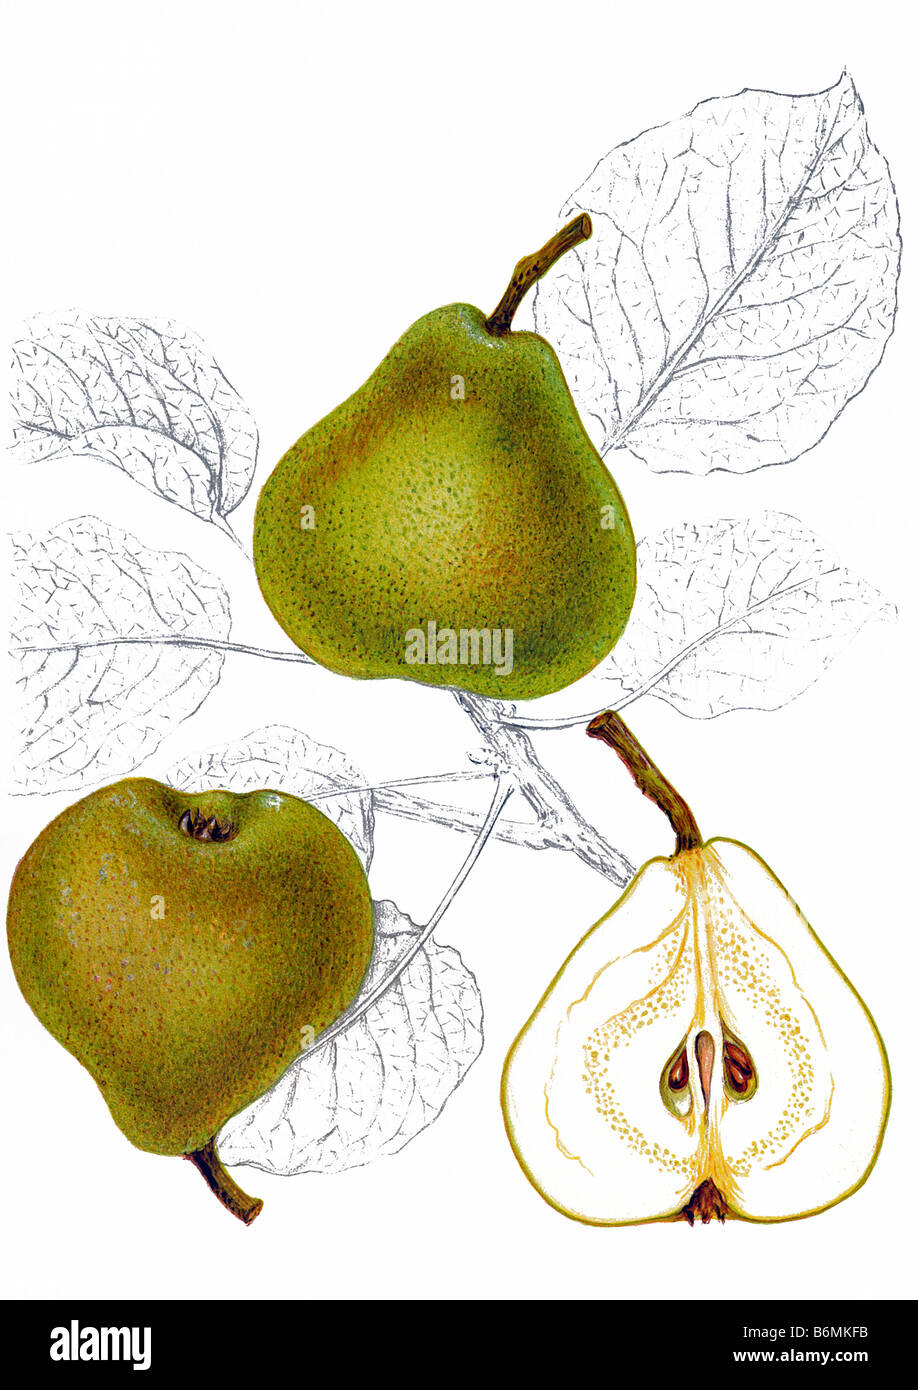 Illustration of a pear and a pear half Stock Photo